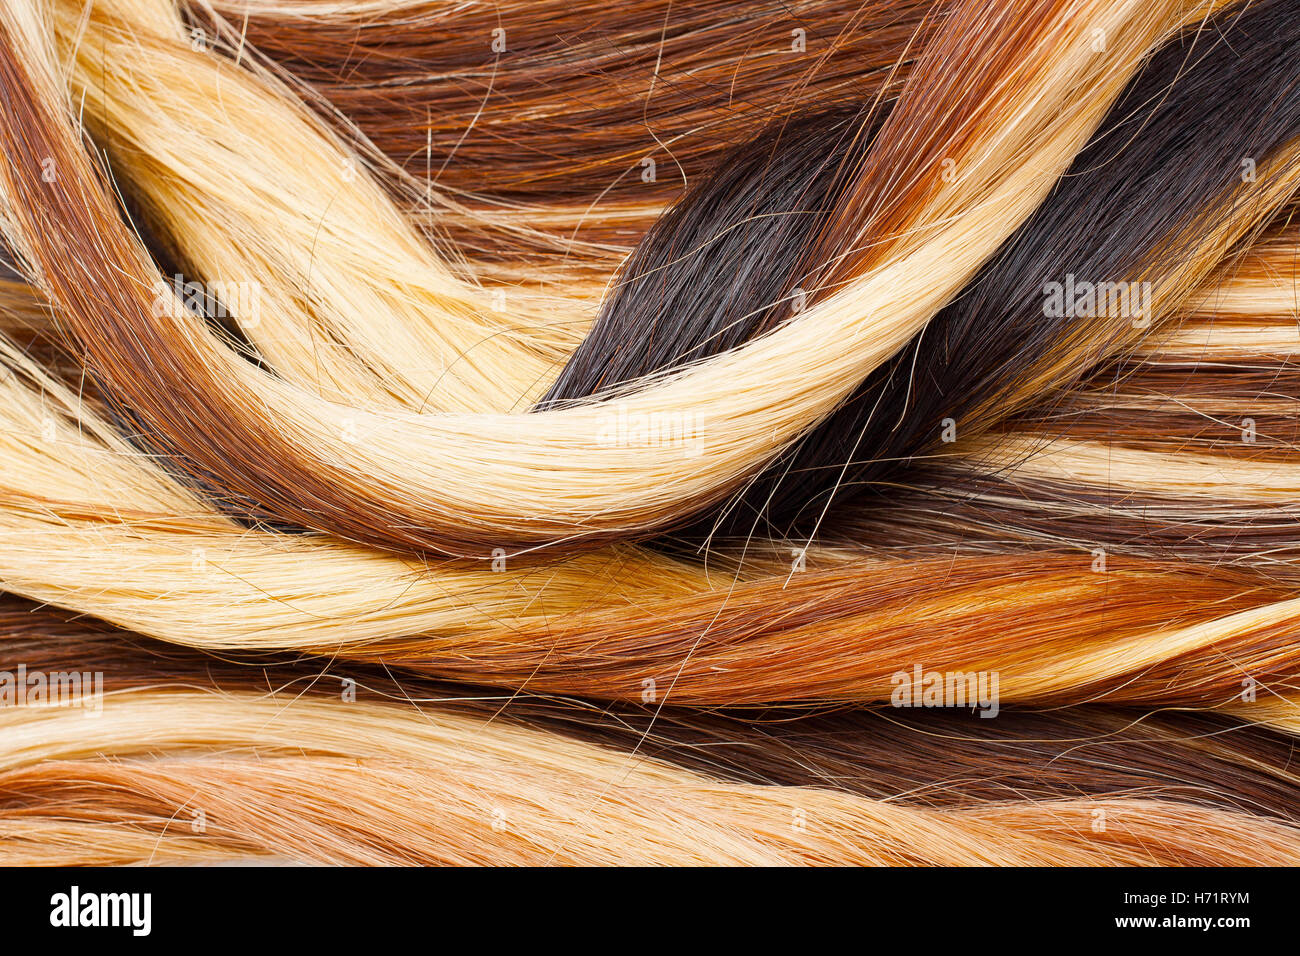 European human hair extension weft. Colored dry and silky hairs brown light blond red mixed ombre colors. Curly straight texture Stock Photo